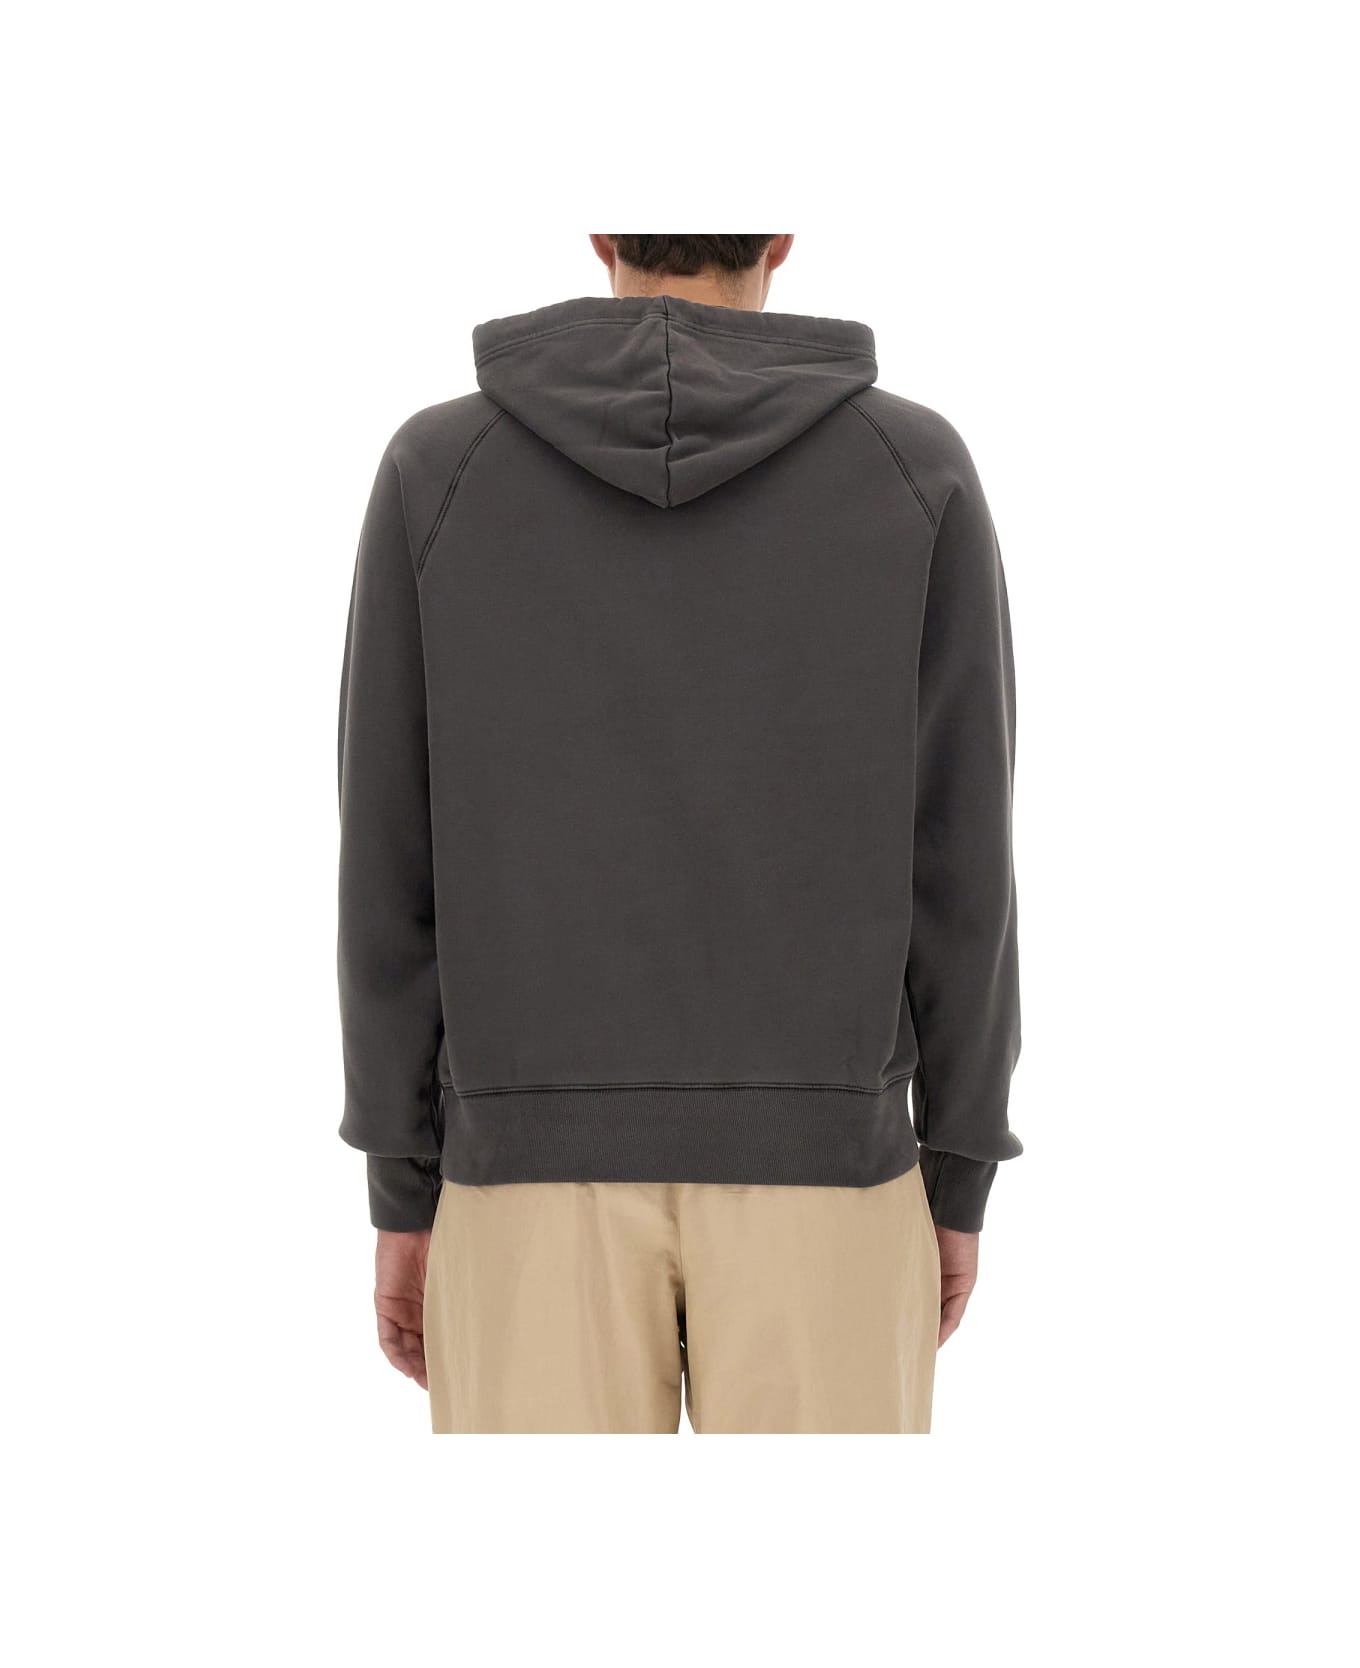 PS by Paul Smith Sweatshirt With Logo - CHARCOAL